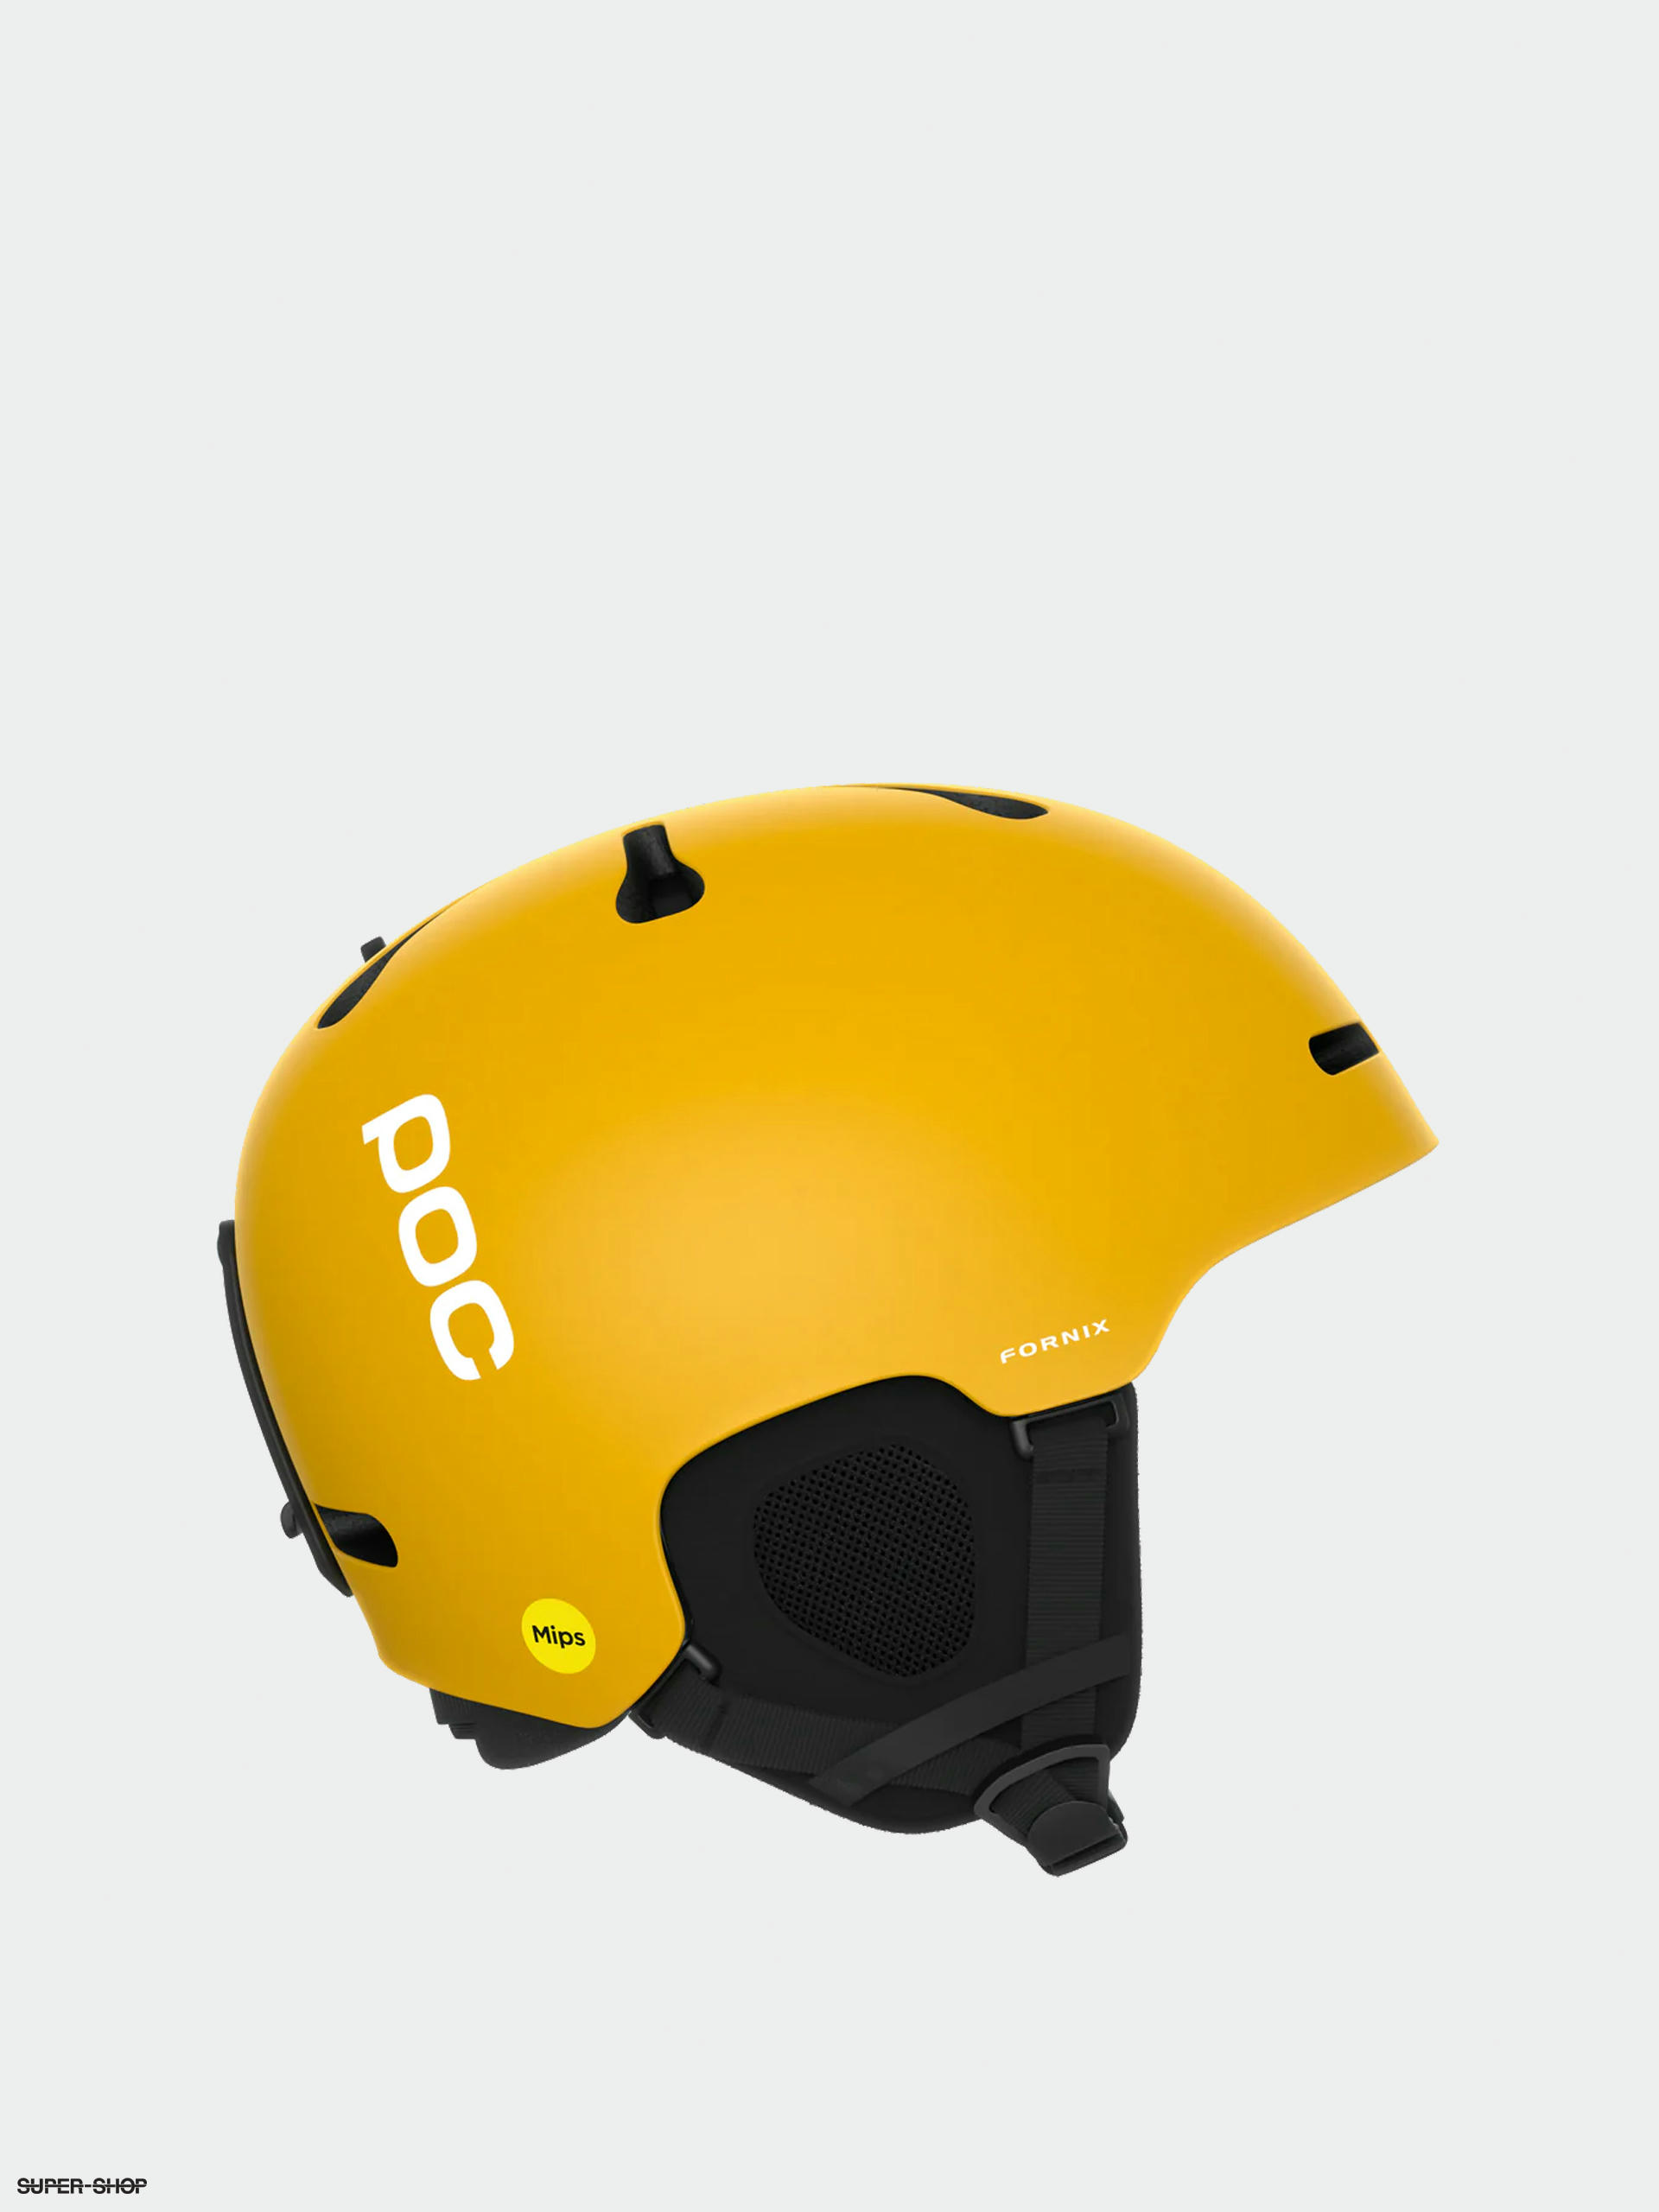 Buy POC Fornix MIPS sulphite yellow matt from £121.49 (Today) – Best Deals  on